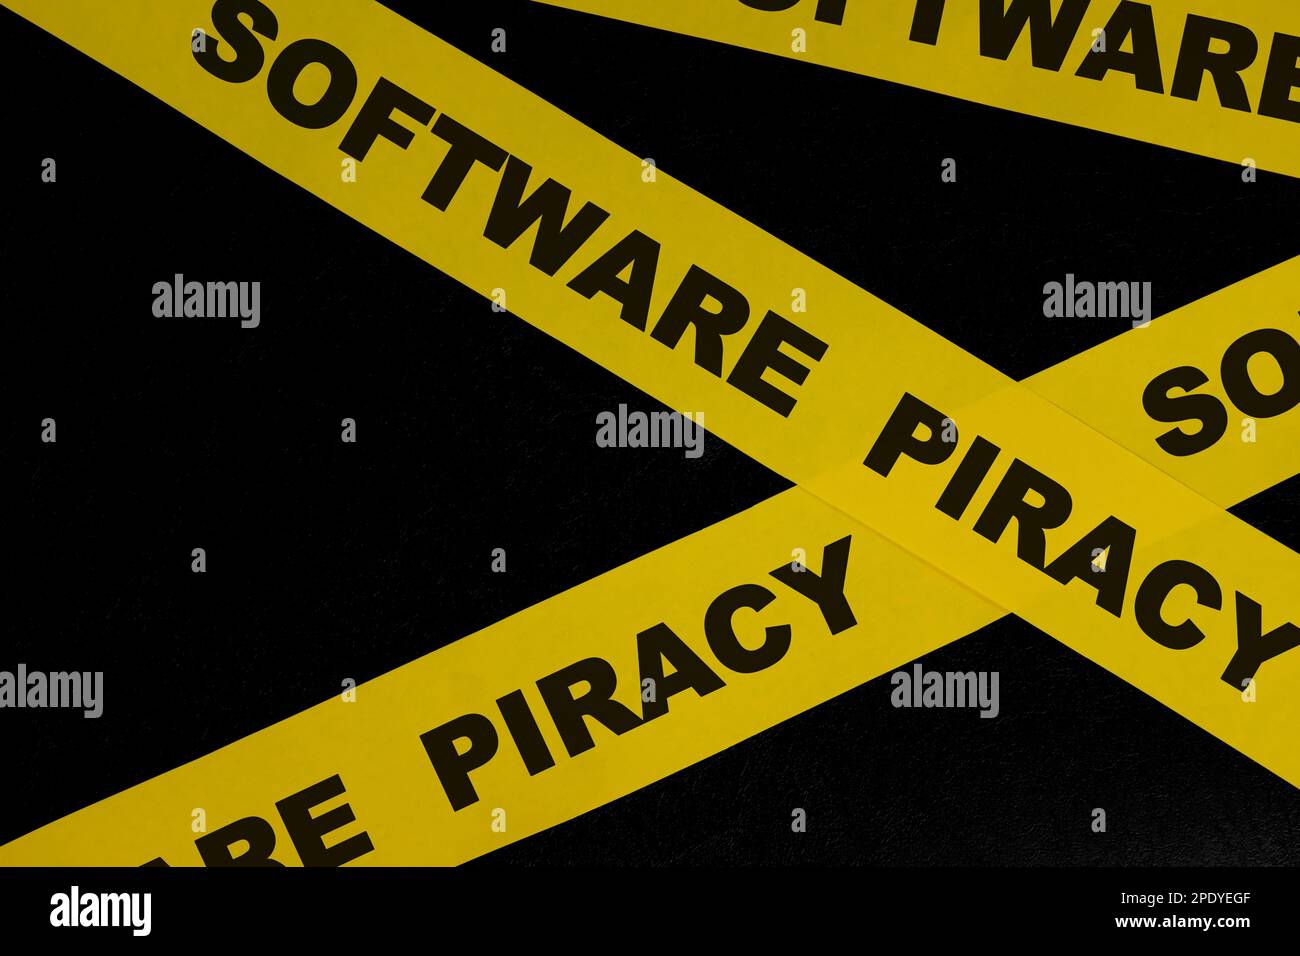 Software piracy alert, caution and warning concept. Yellow barricade tape with word in dark black background. Stock Photo